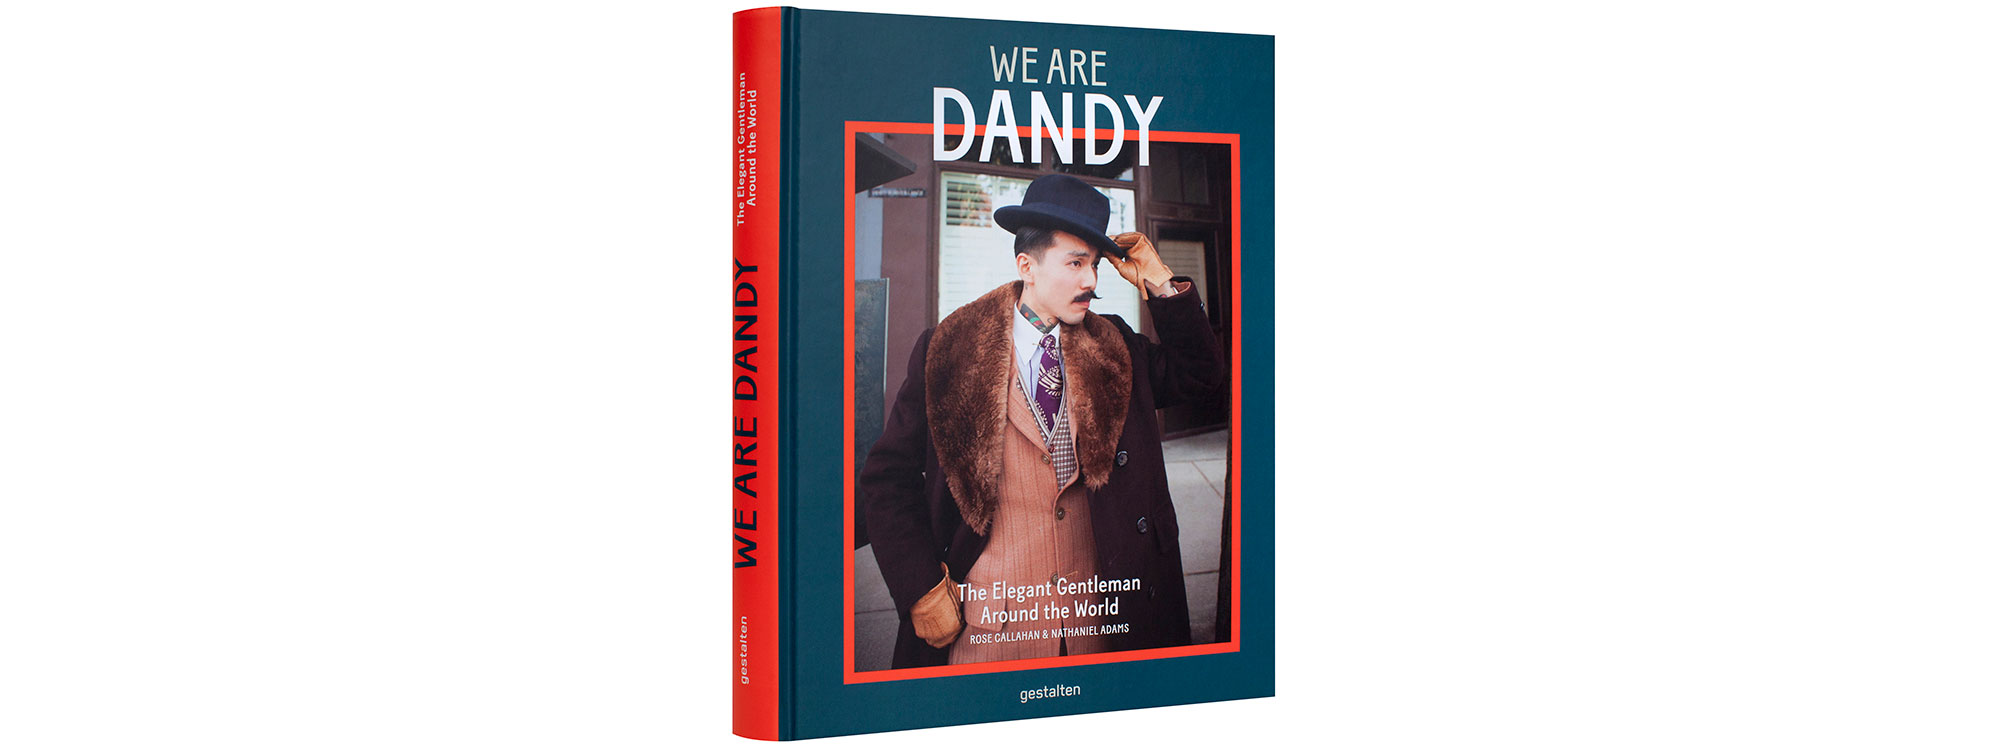 Unearthing the World's Best Dressed Men in We Are Dandy - The Manual